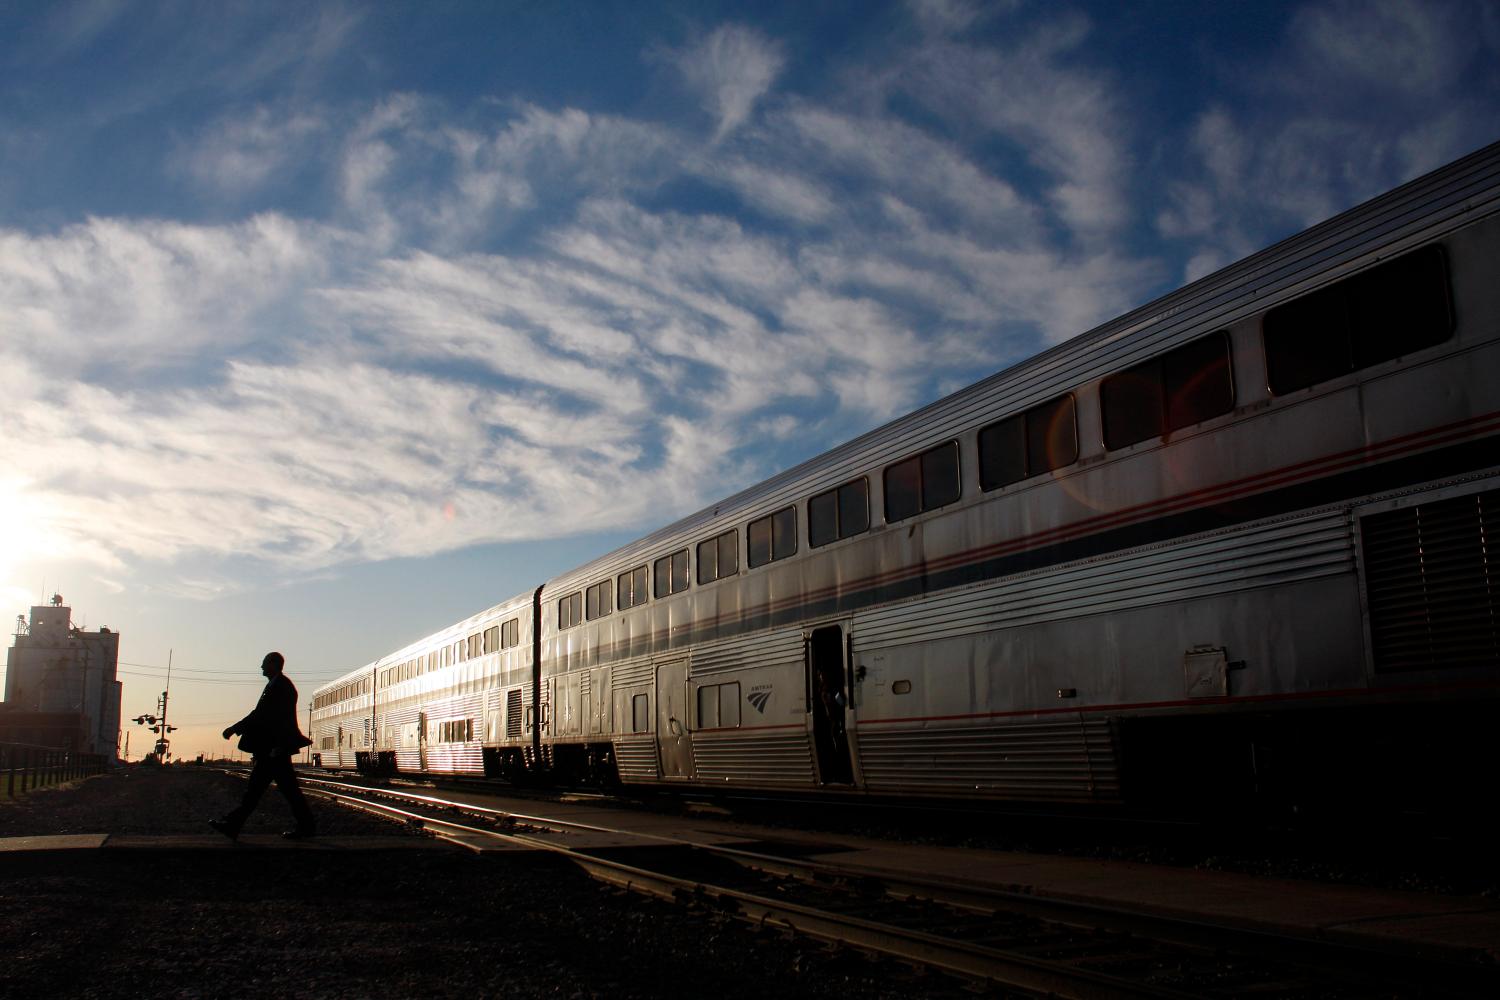 An Amtrak train attendant walks across the tracks at the Holdrege station after exiting the 5 California Zephyr Amtrak train in Holdrege, Nebraska June 13, 2008. U.S. government-owned passenger rail company Amtrak wields improper and coercive regulatory power over private freight carriers under a law that lets it help set rules that competing railroads must follow, a federal appeals court ruled on April 29, 2016.   REUTERS/Joshua Lott/File Photo